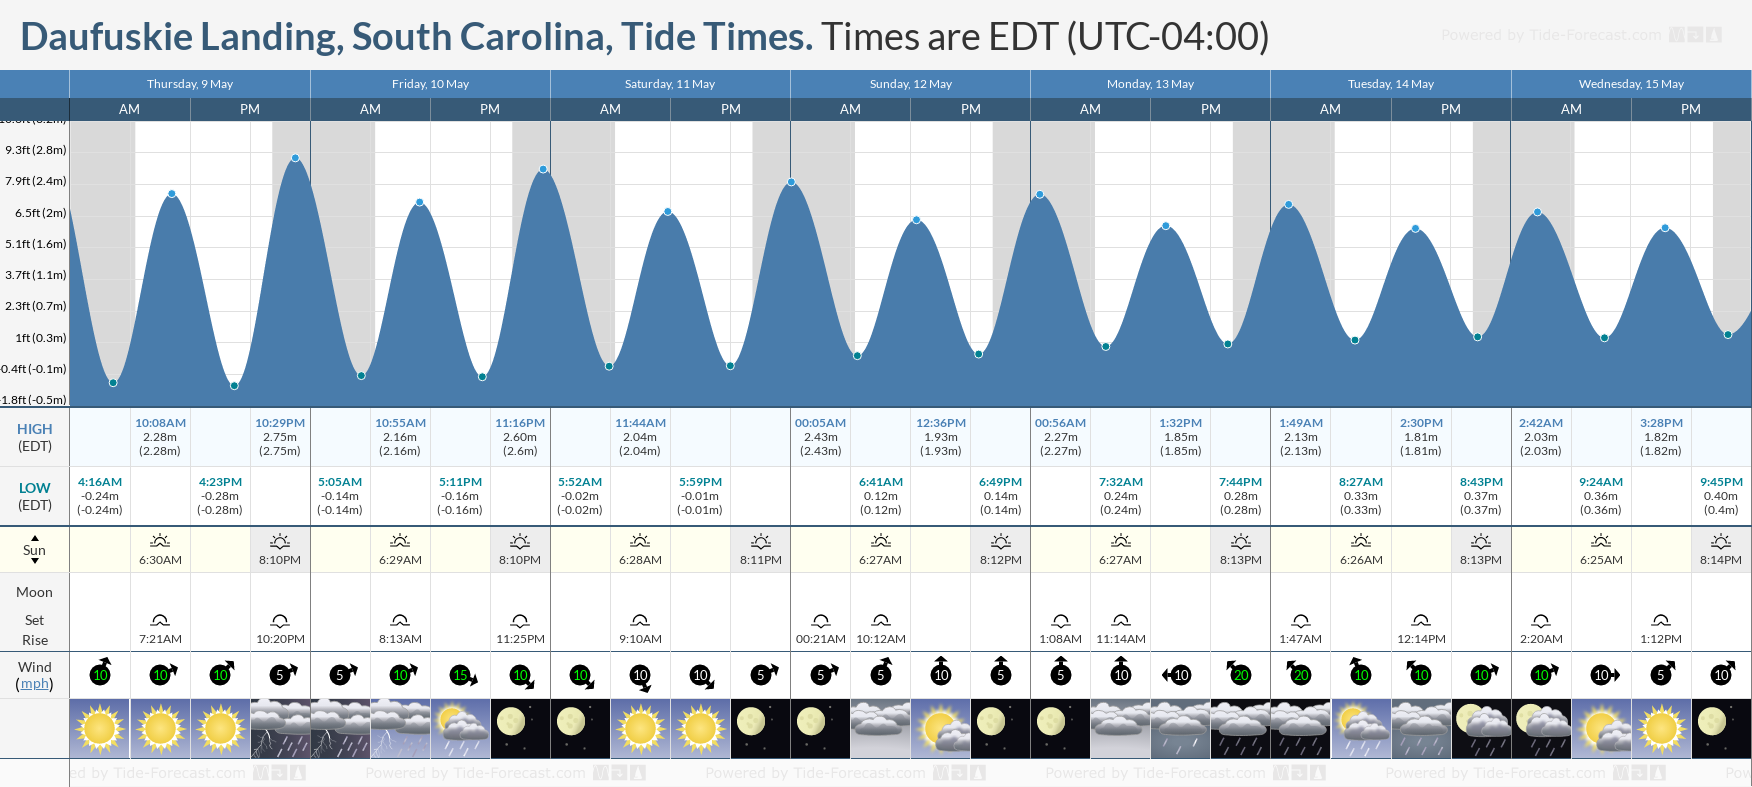 Daufuskie Landing, South Carolina Tide Chart including high and low tide tide times for the next 7 days